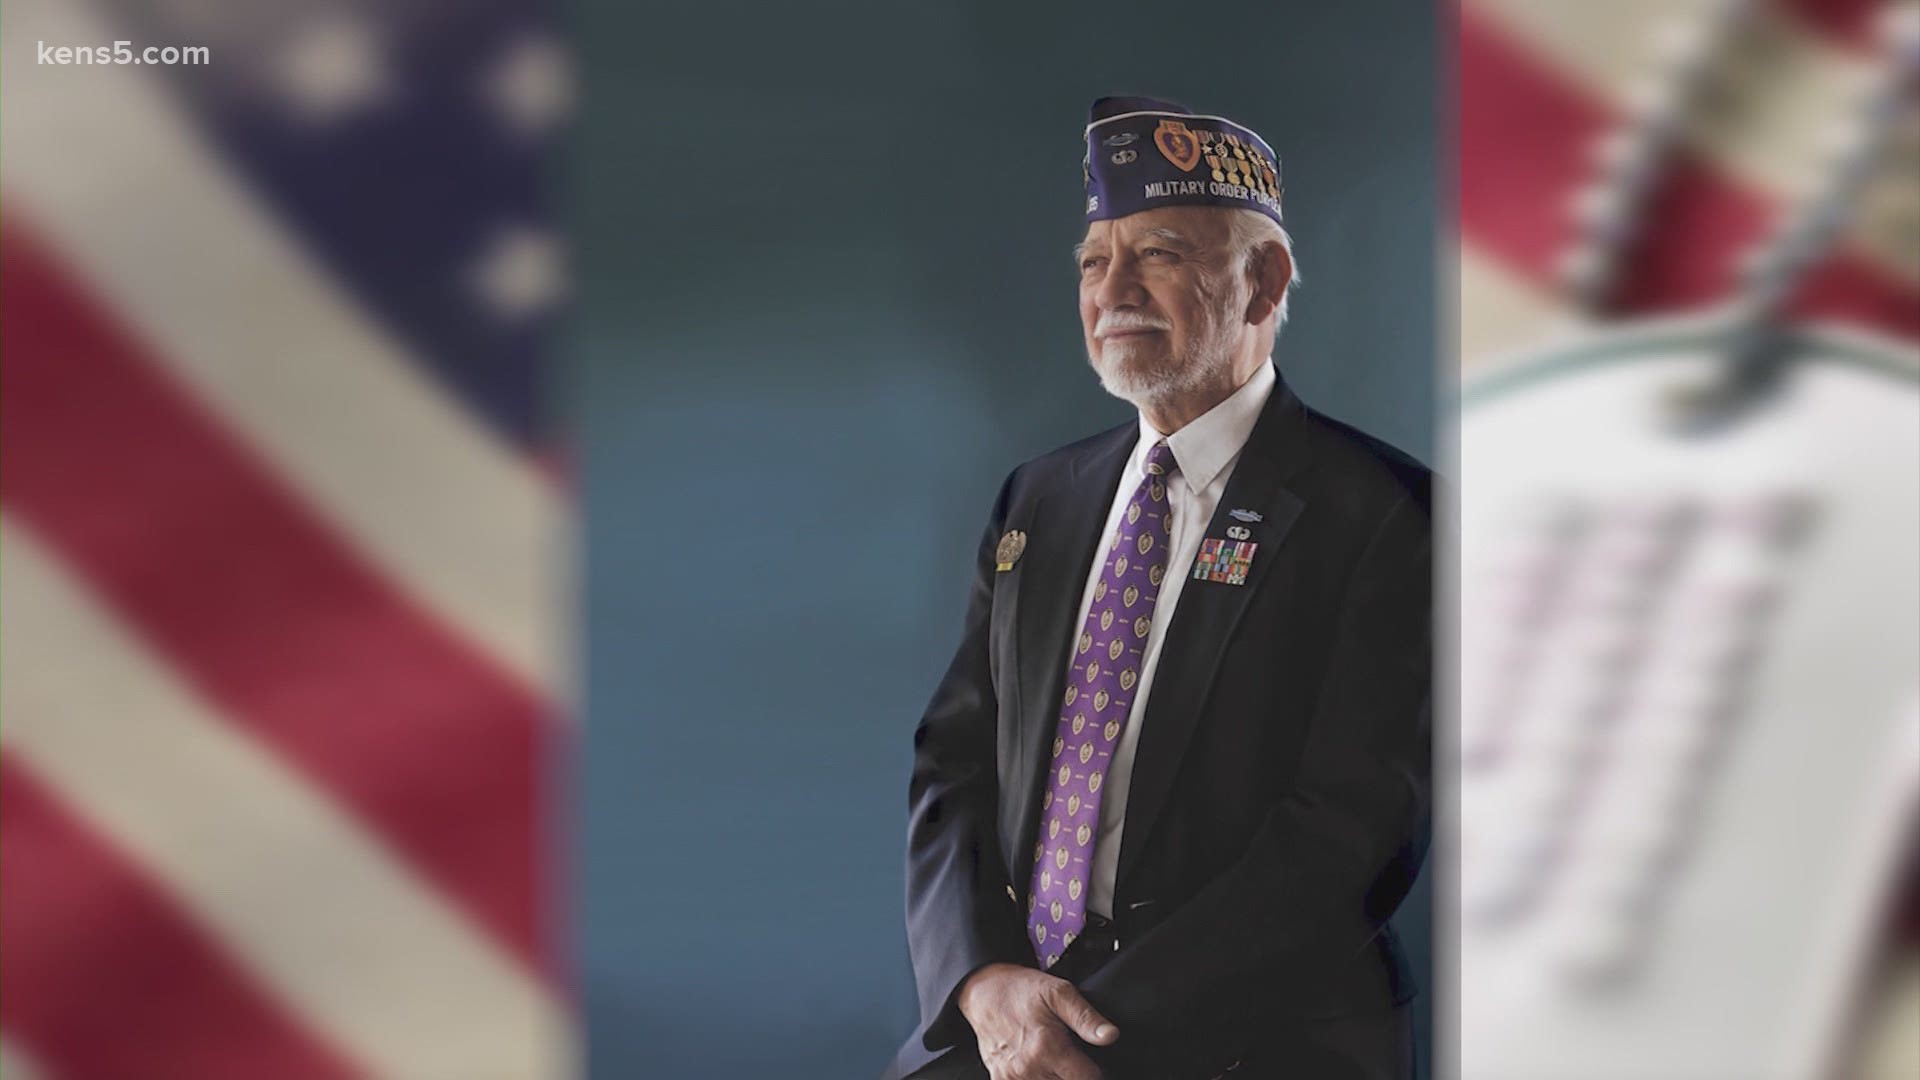 Retired Army Lt. Col. Hector Villarreal, who passed away, leaves behind a legacy that will continue to serve local veterans.